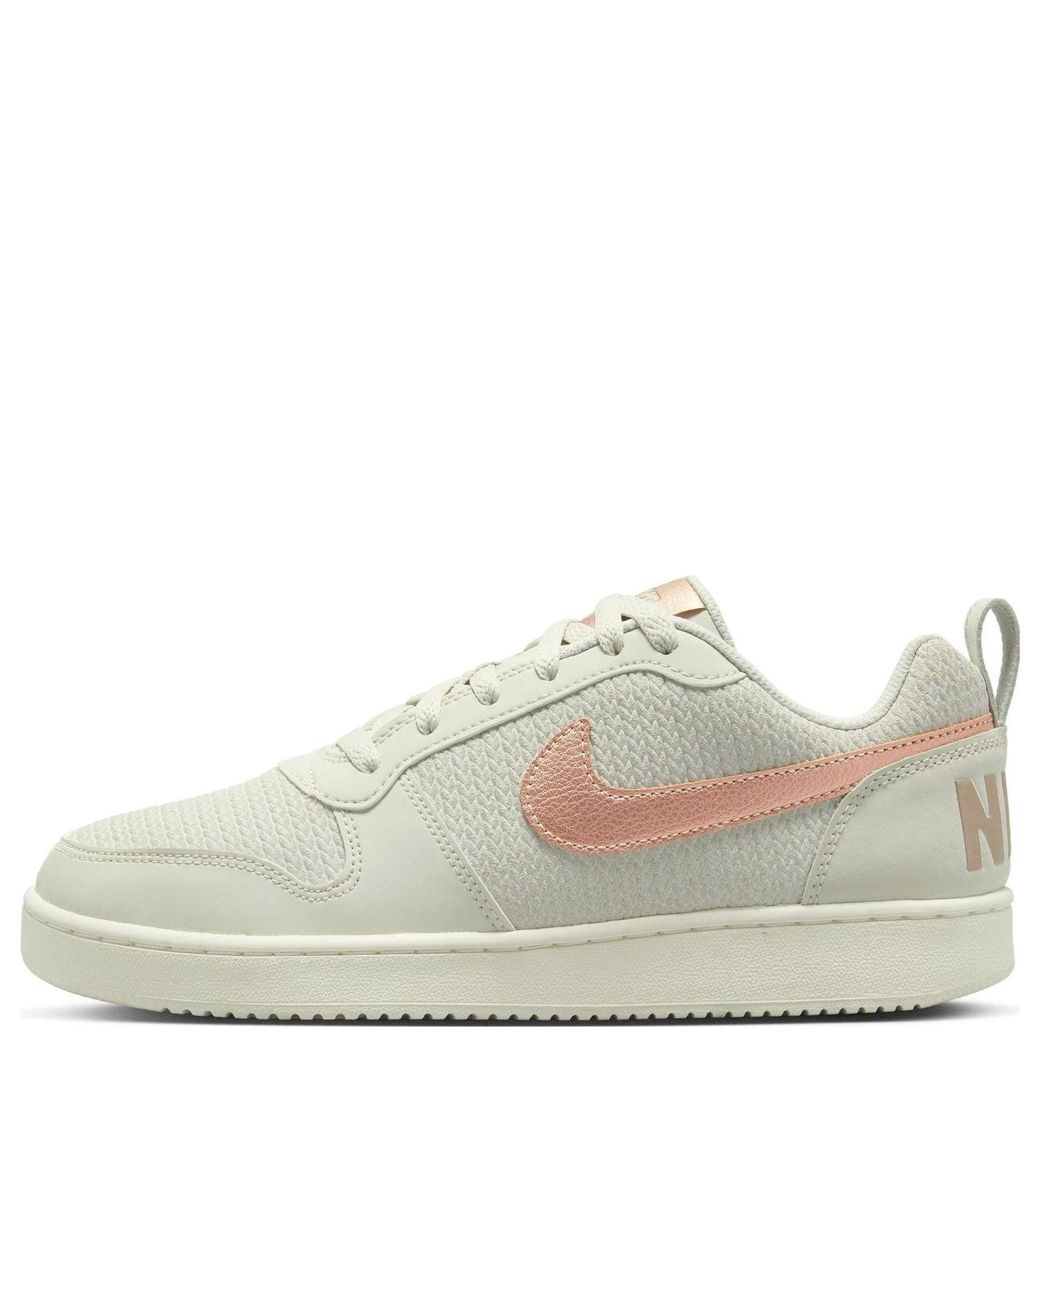 Nike Court Borough Low Prm in White | Lyst